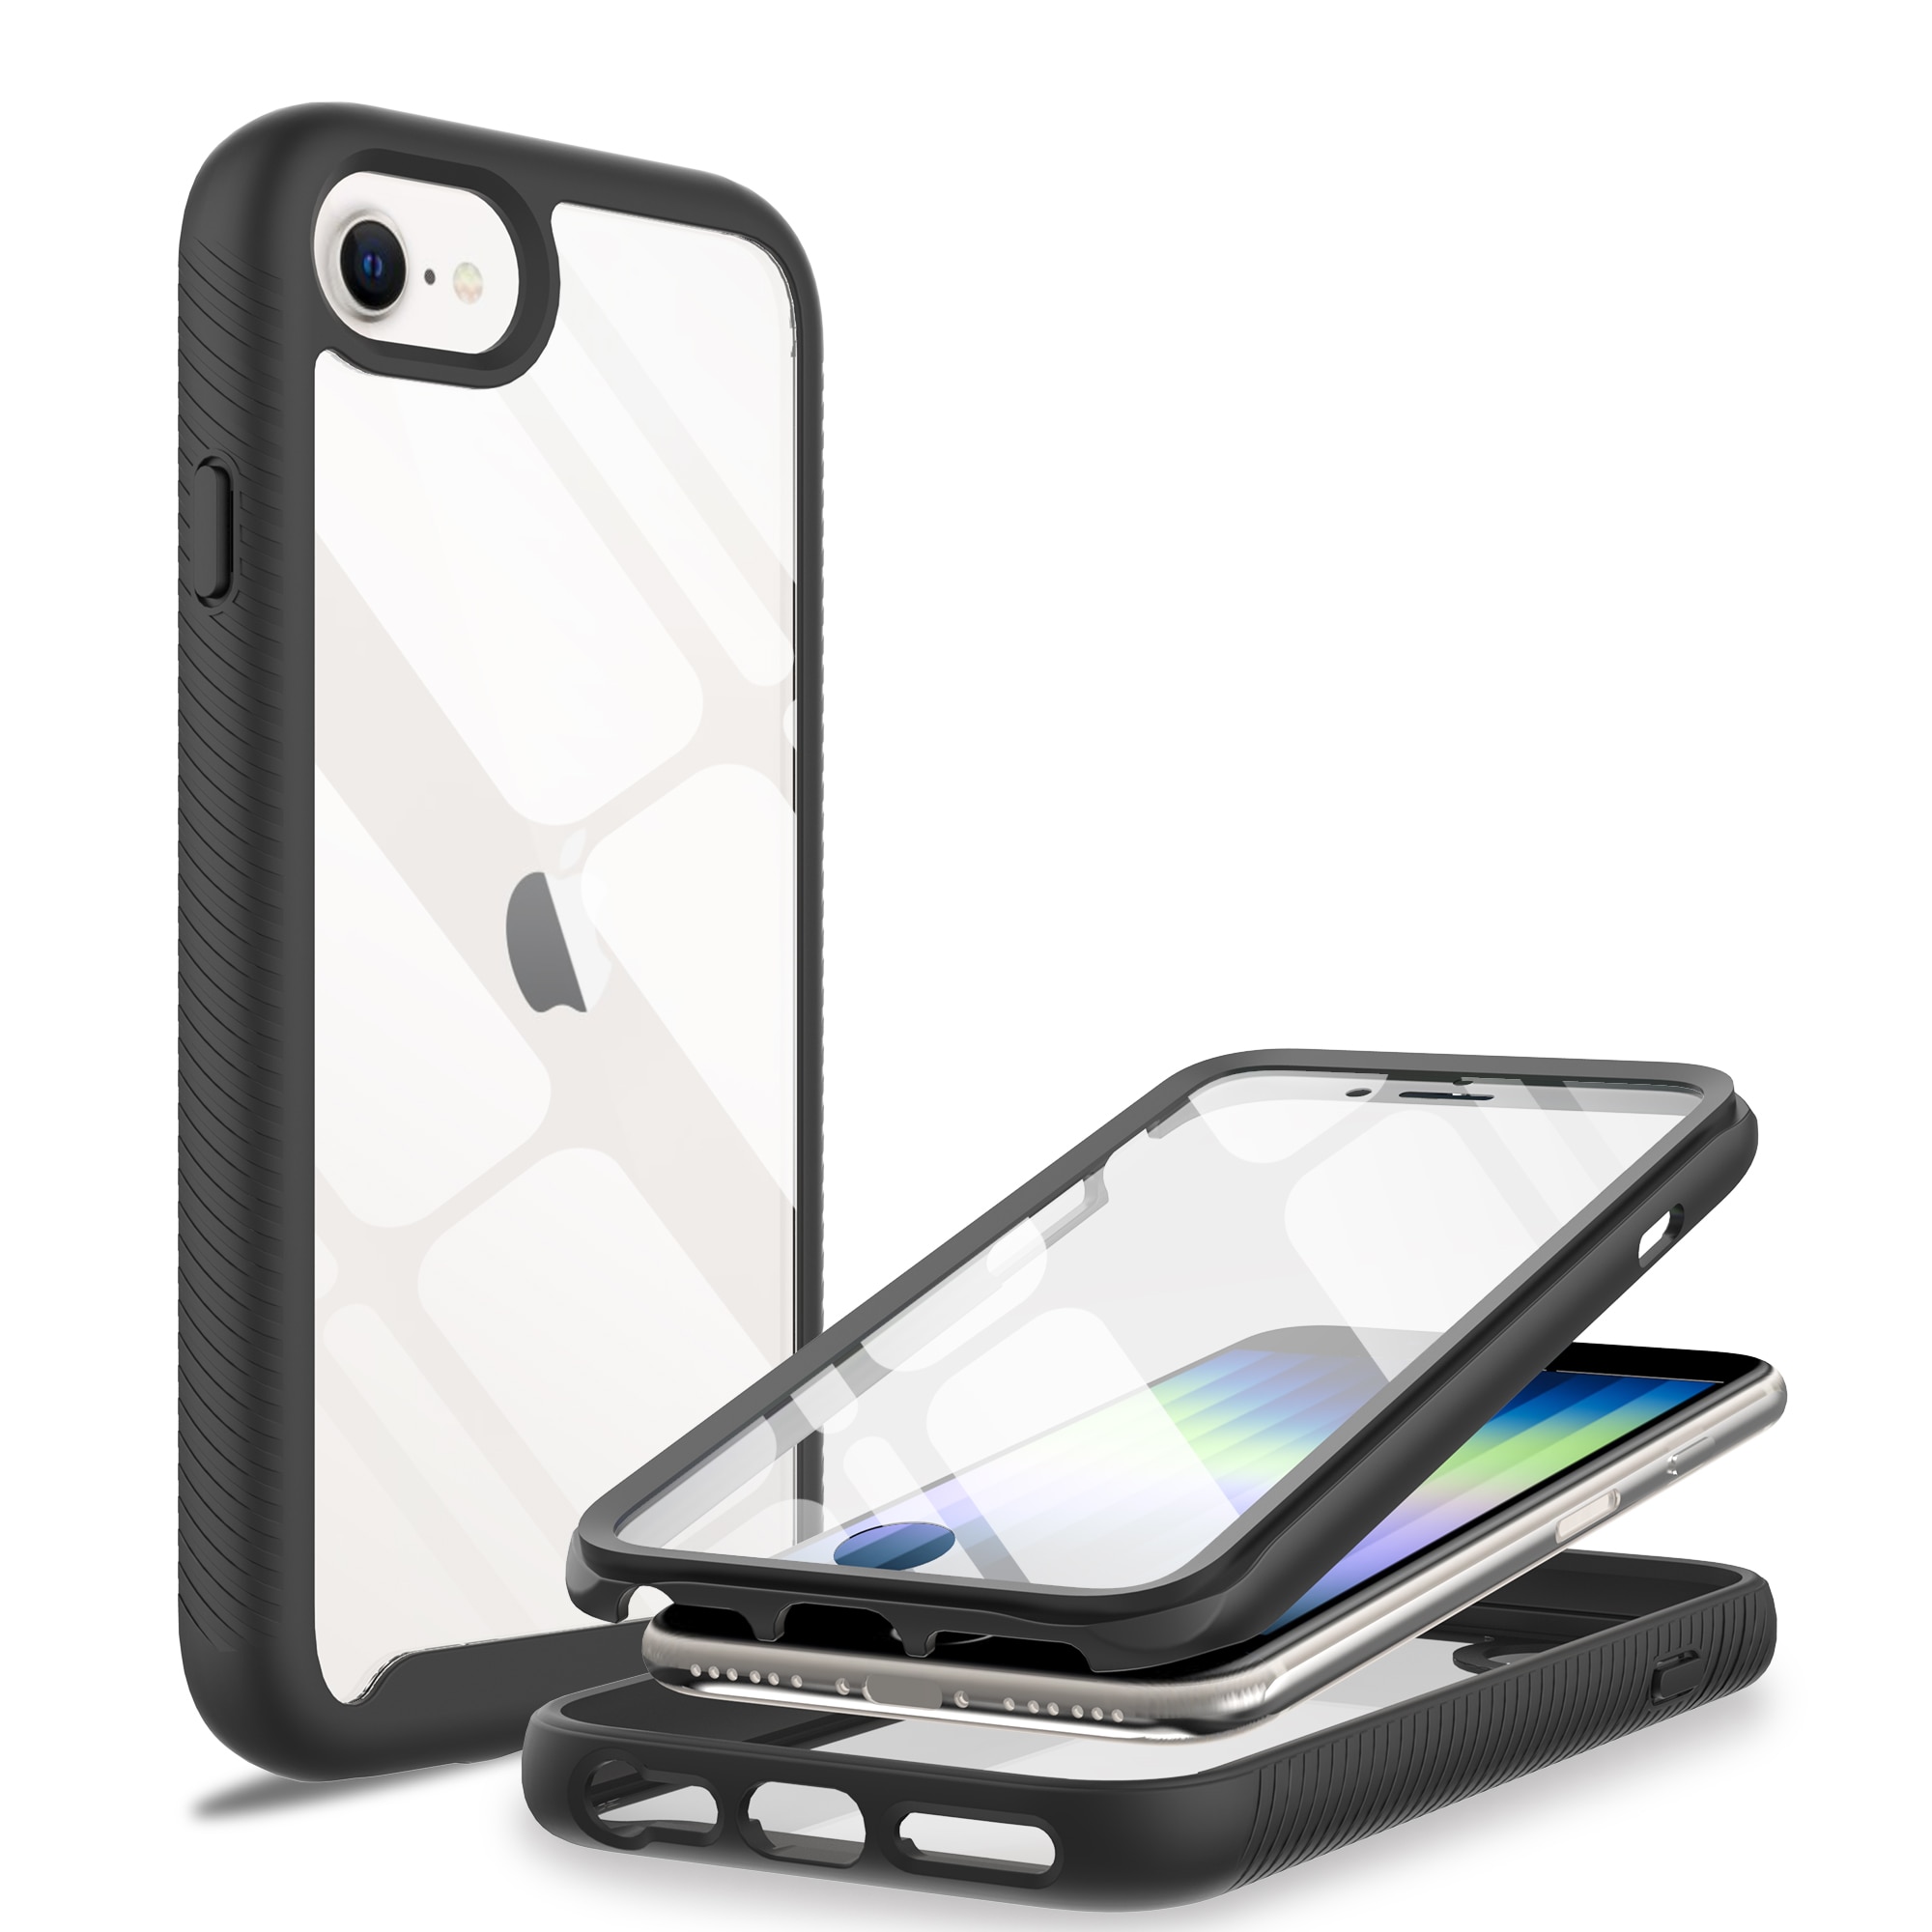 Full Protection Case iPhone 7 Black